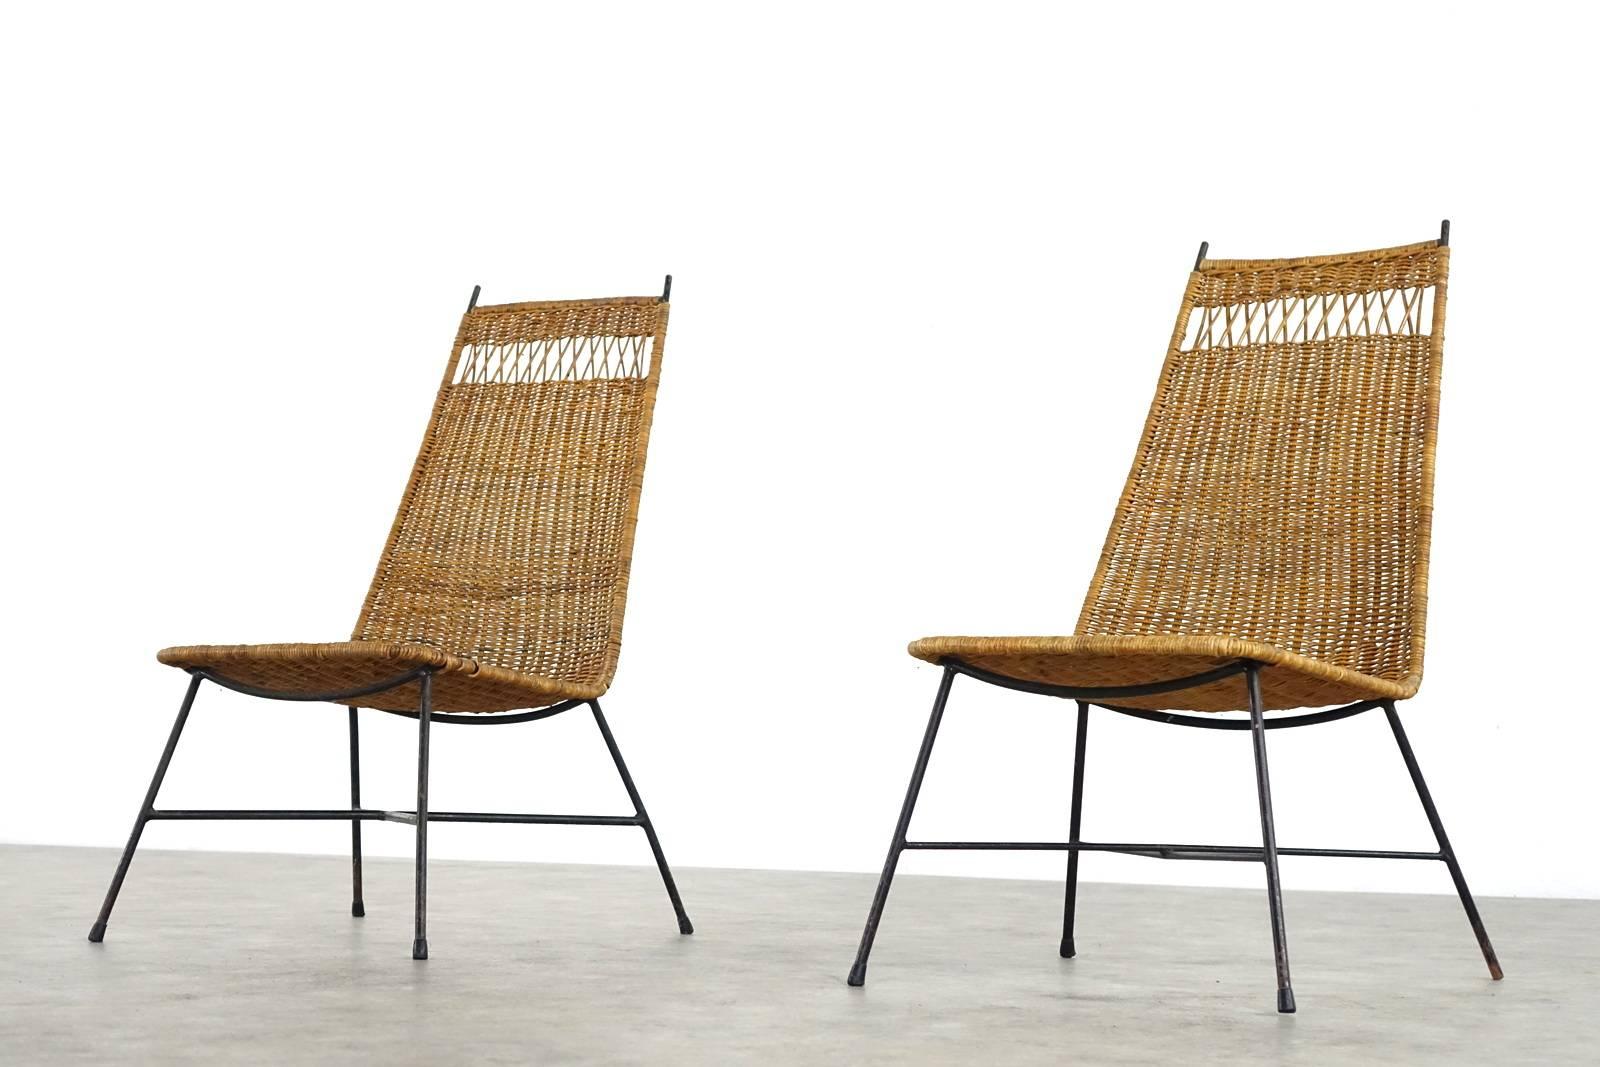 Italian Nice Pair of Mid-Century Modern Wicker Basket Lounge Chairs from France